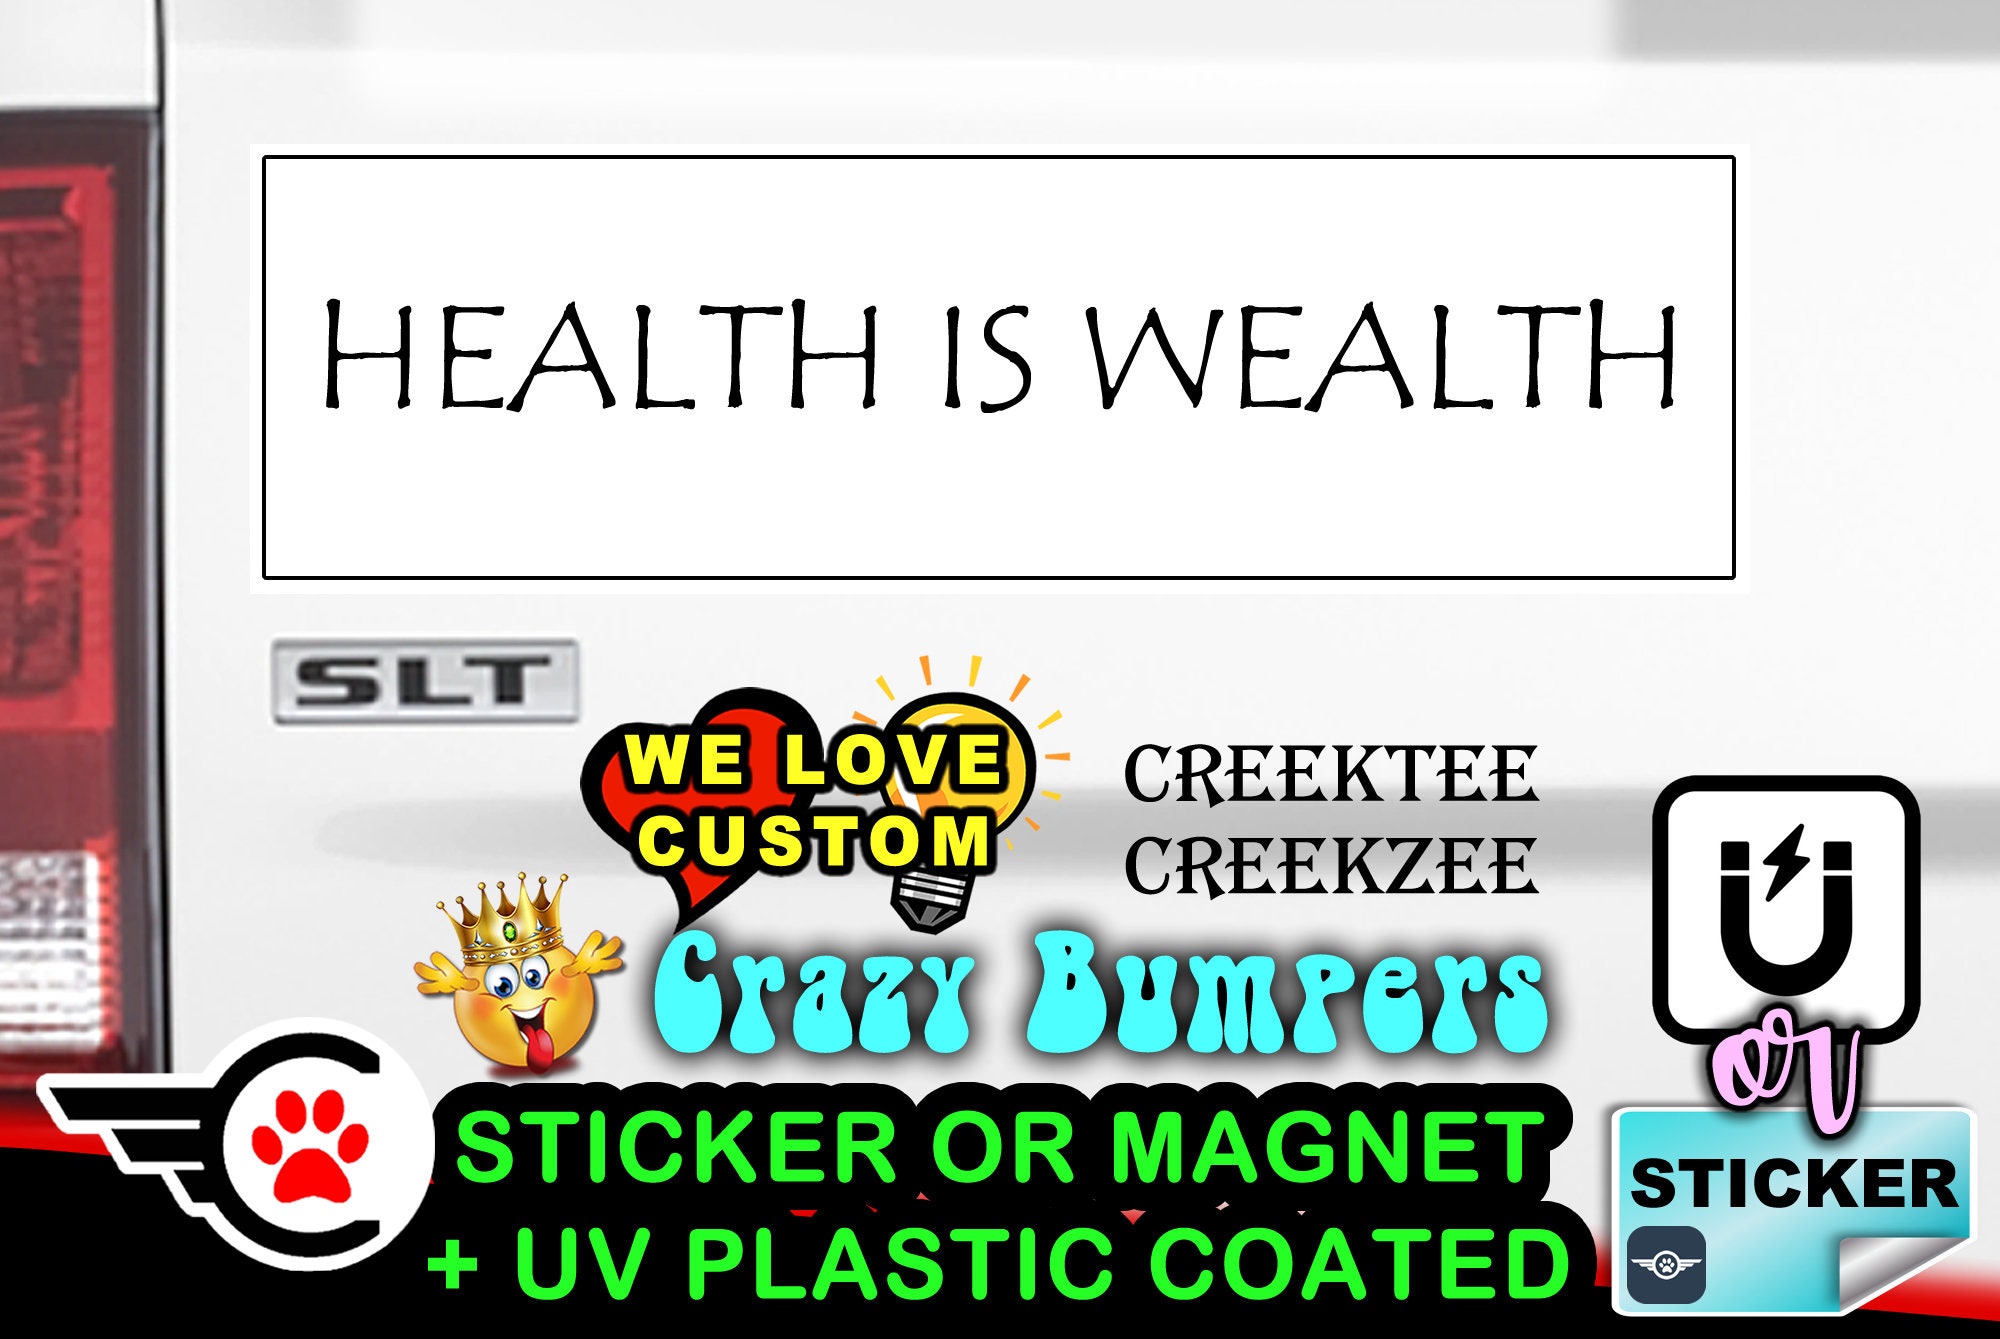 Health is Wealth Bumper Sticker or Magnet sizes 4